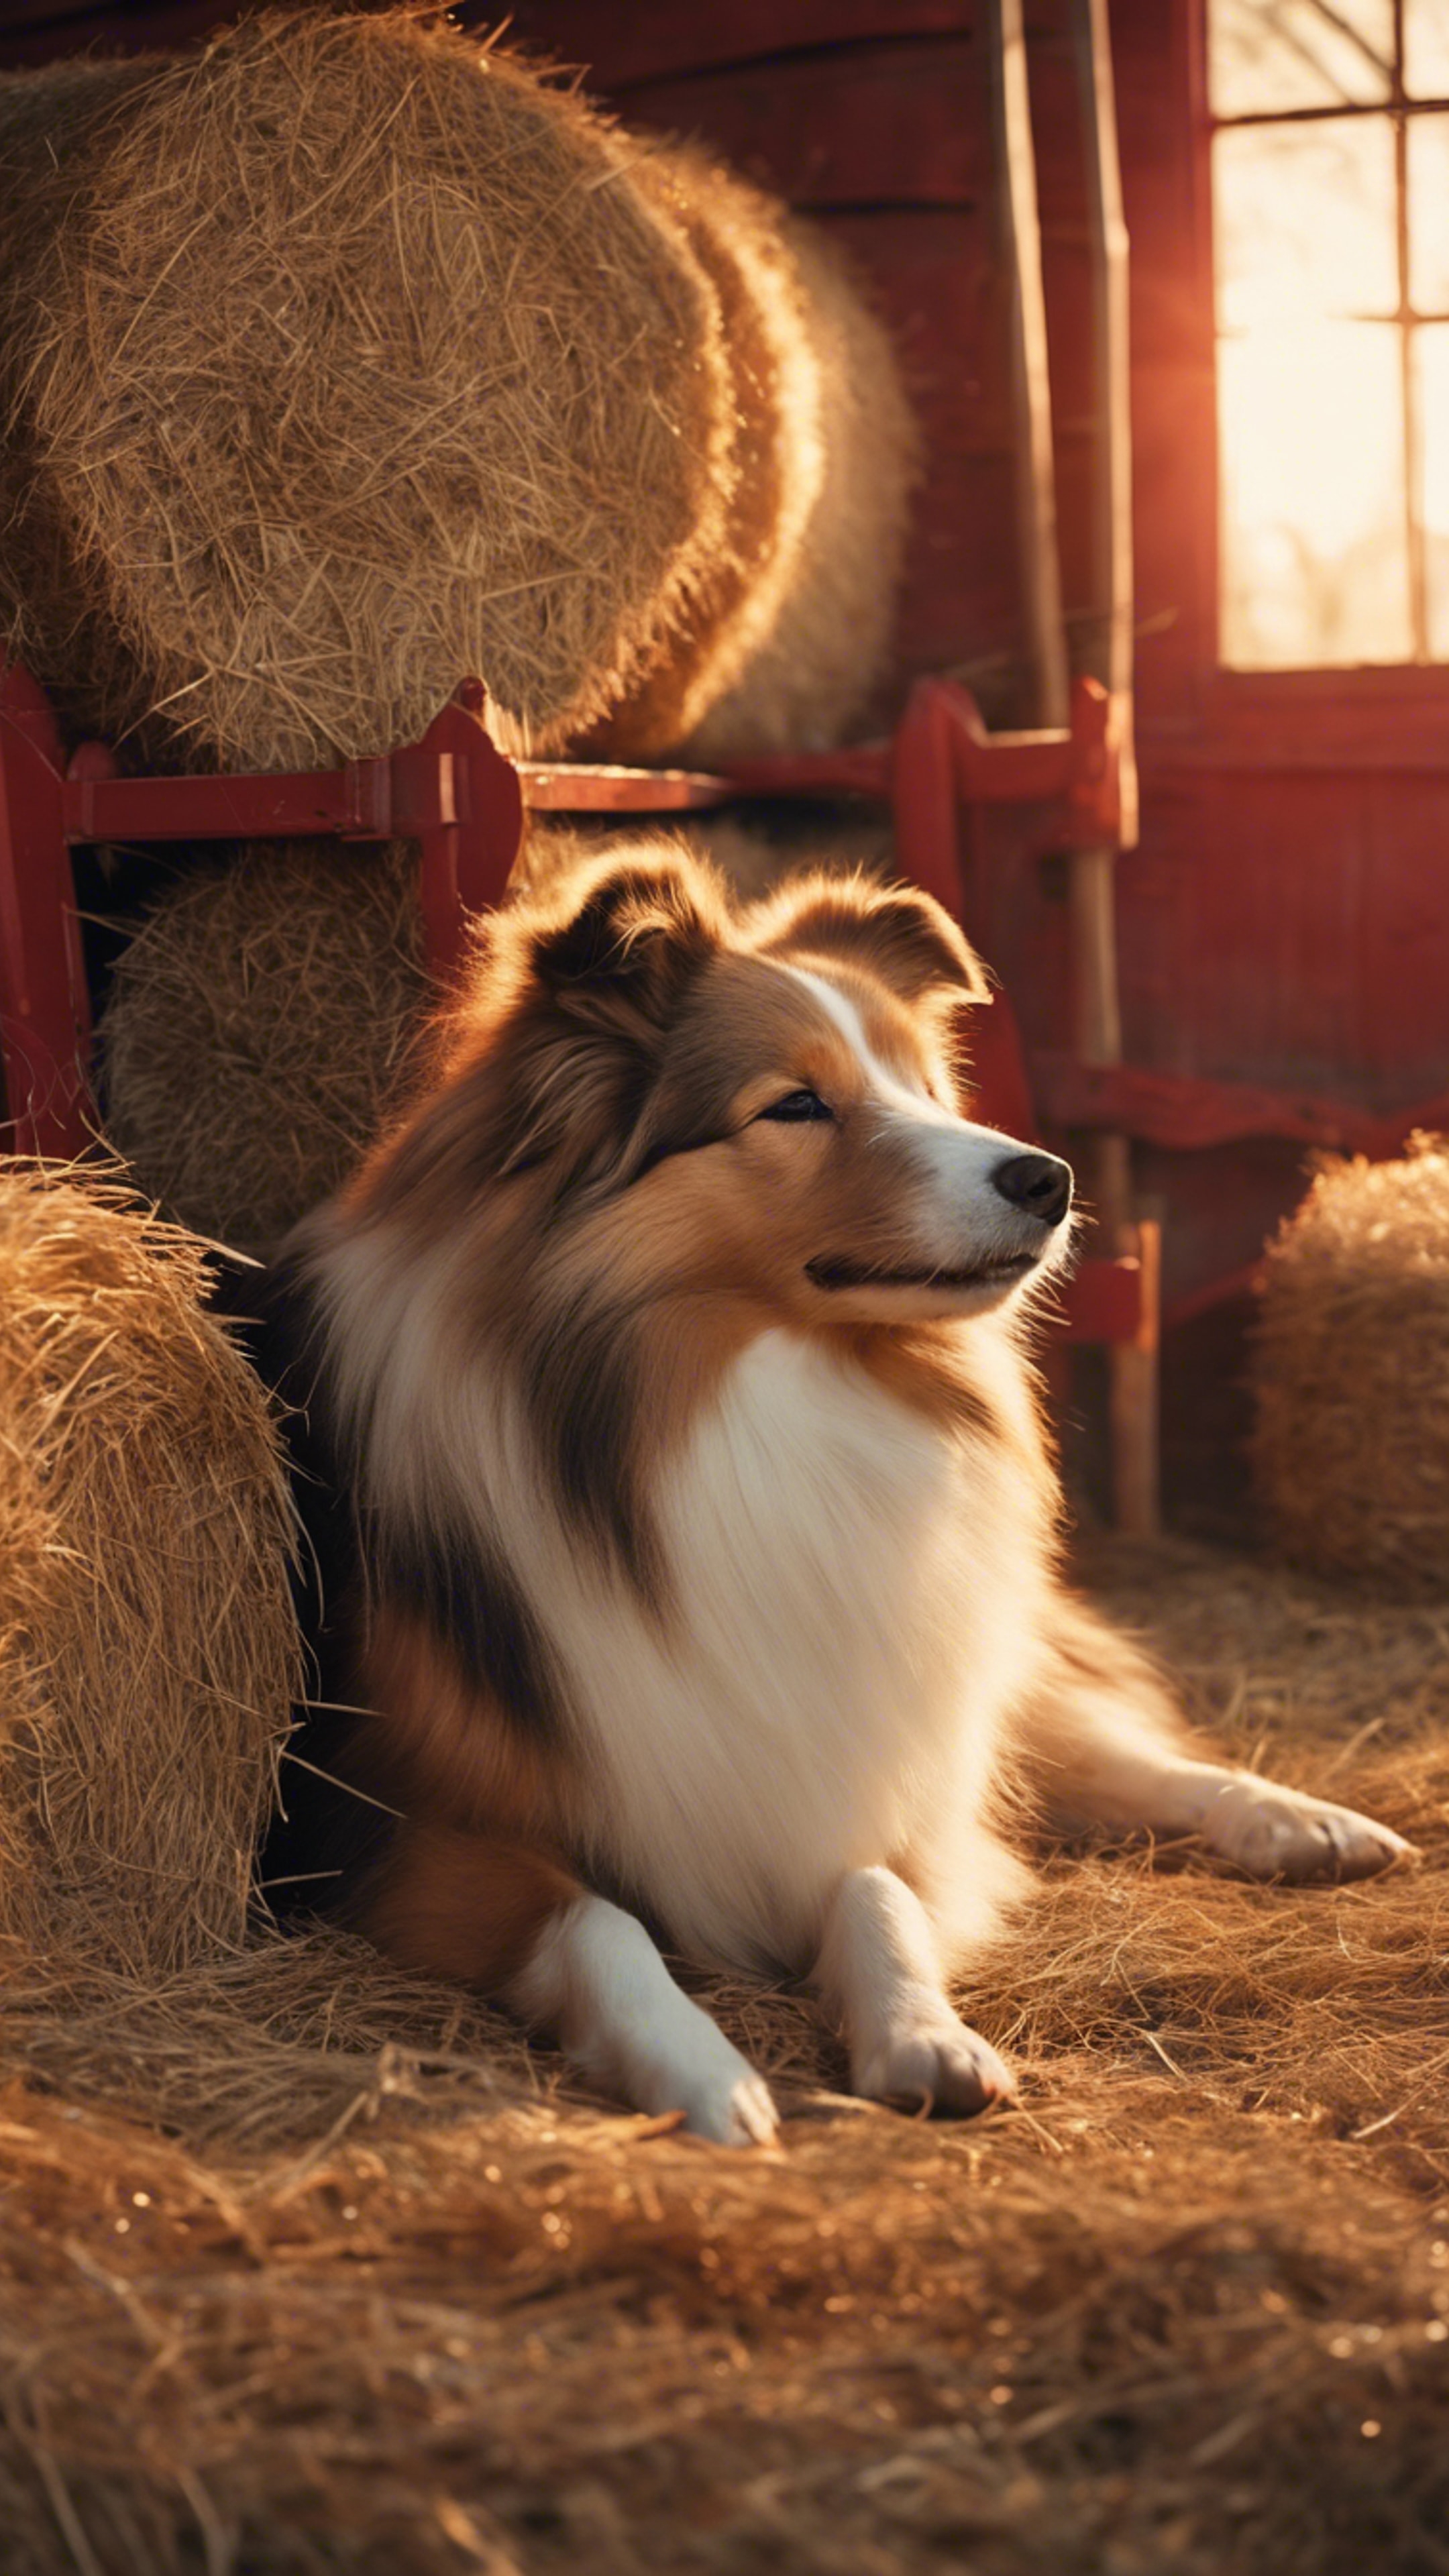 A Shetland Sheepdog sleeping in a vintage red barn, surrounded by hay balls and a setting sun. ផ្ទាំង​រូបភាព[4b8e09167f2043c5830e]